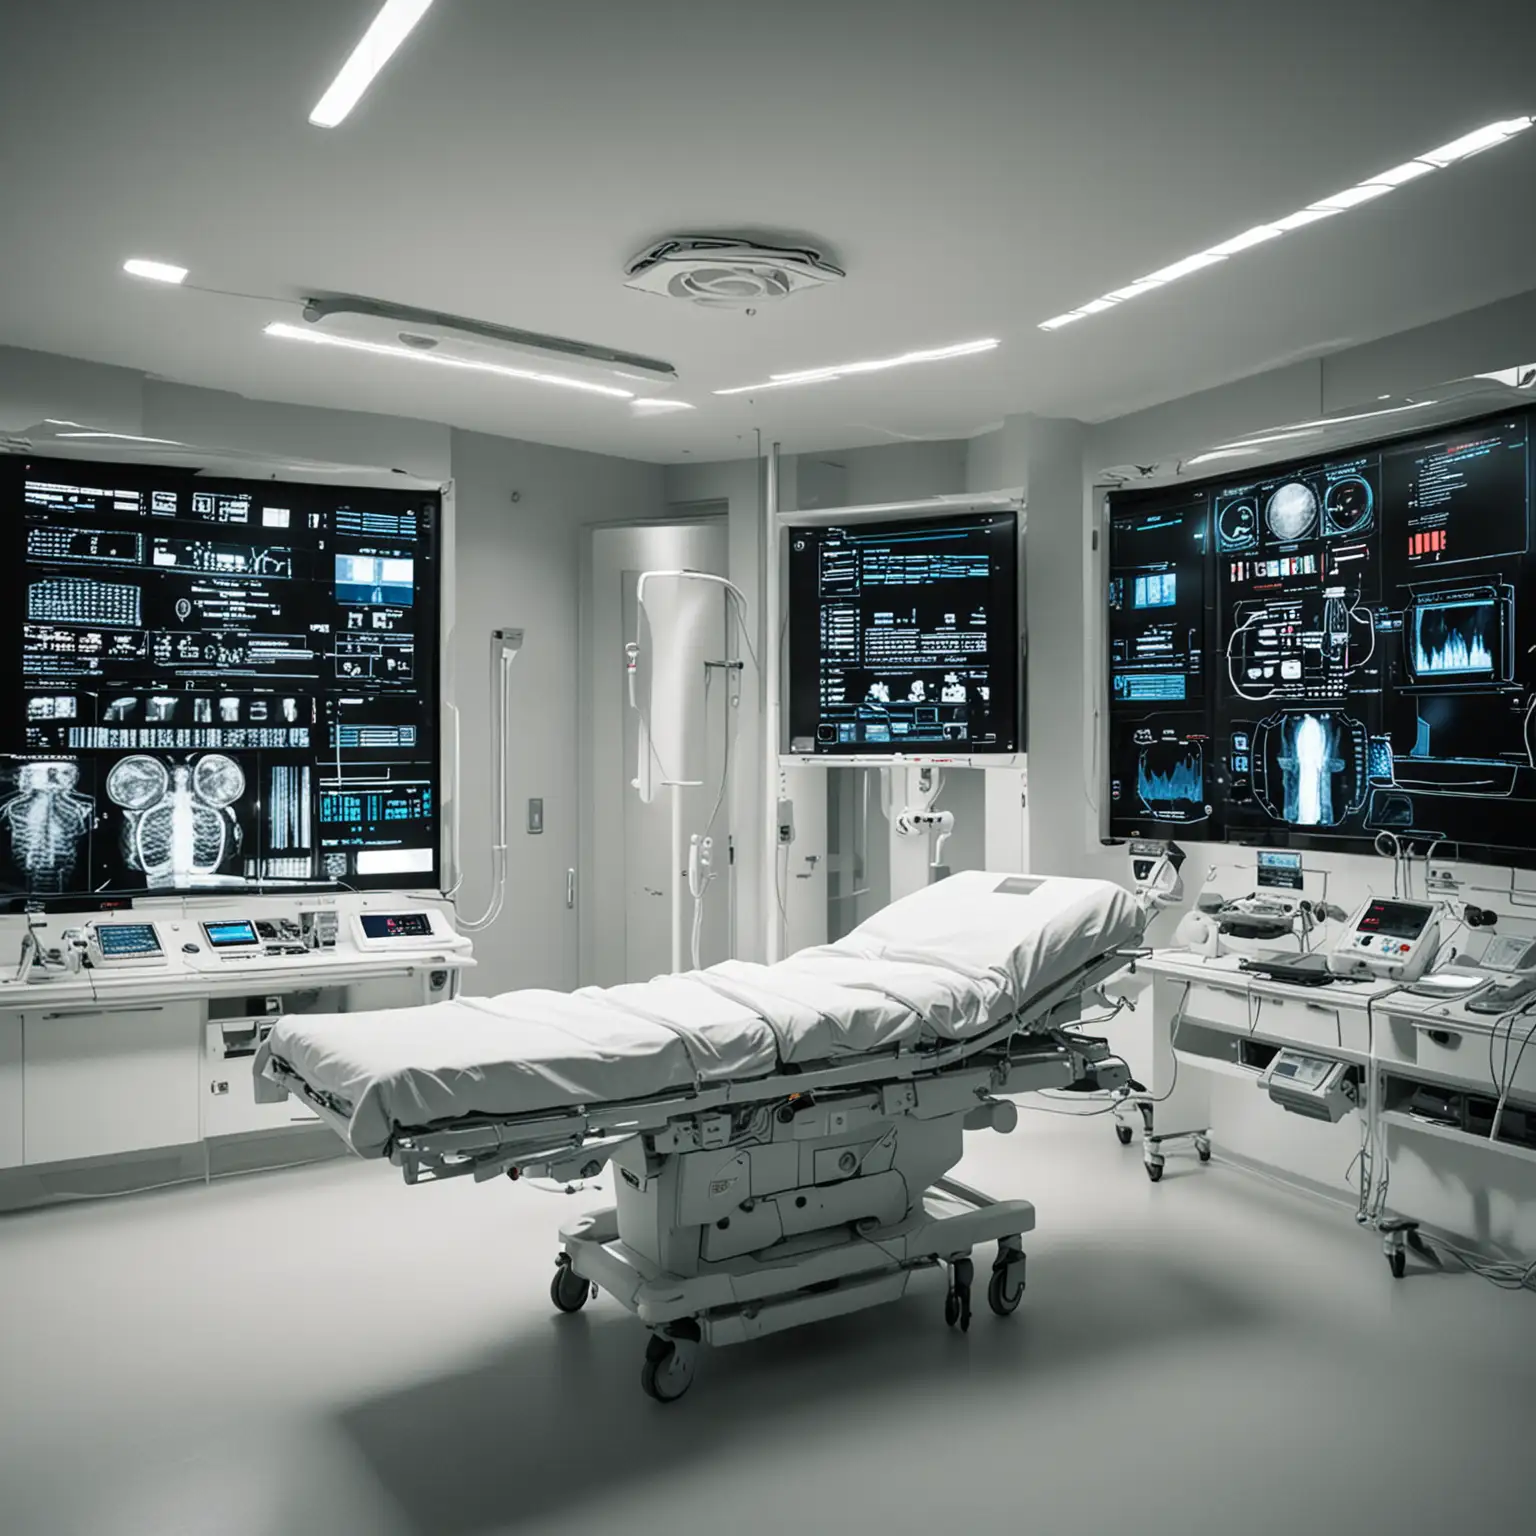 Futuristic Hospital with Monitors and Advanced Technology